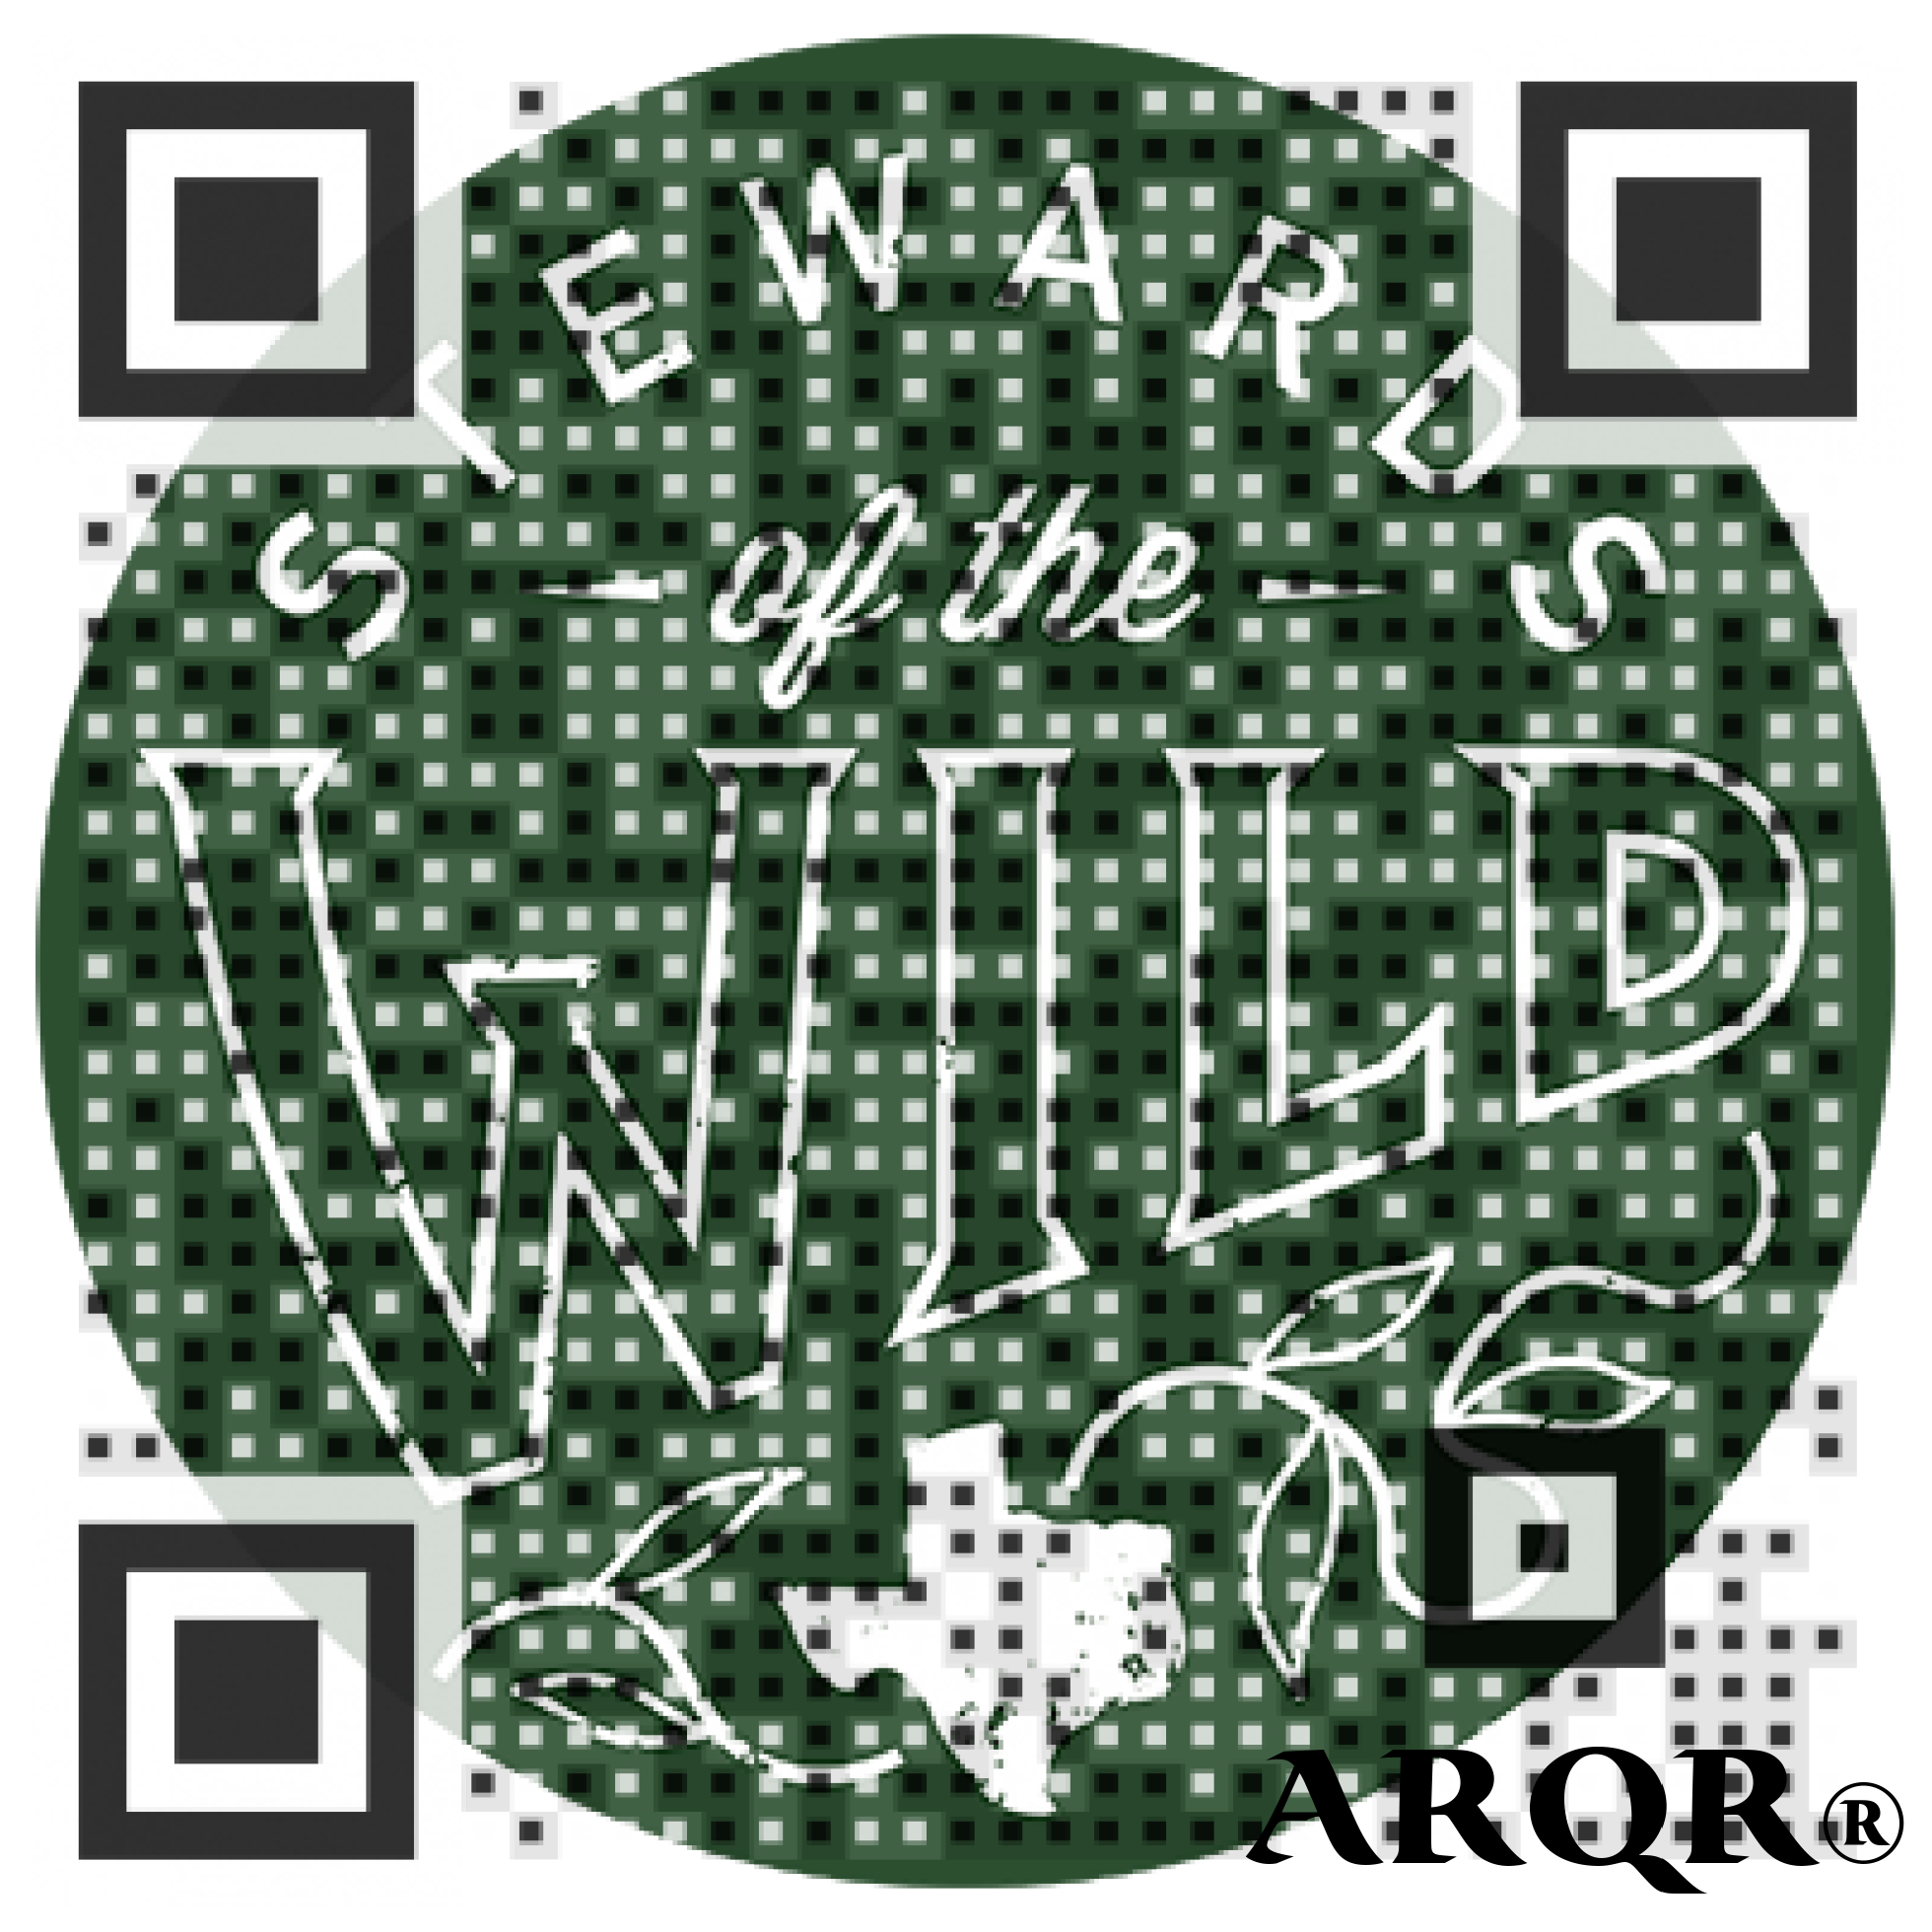 Designer Smart Code for The Stwewards of the Wild, Austin Group by Laird Marynick